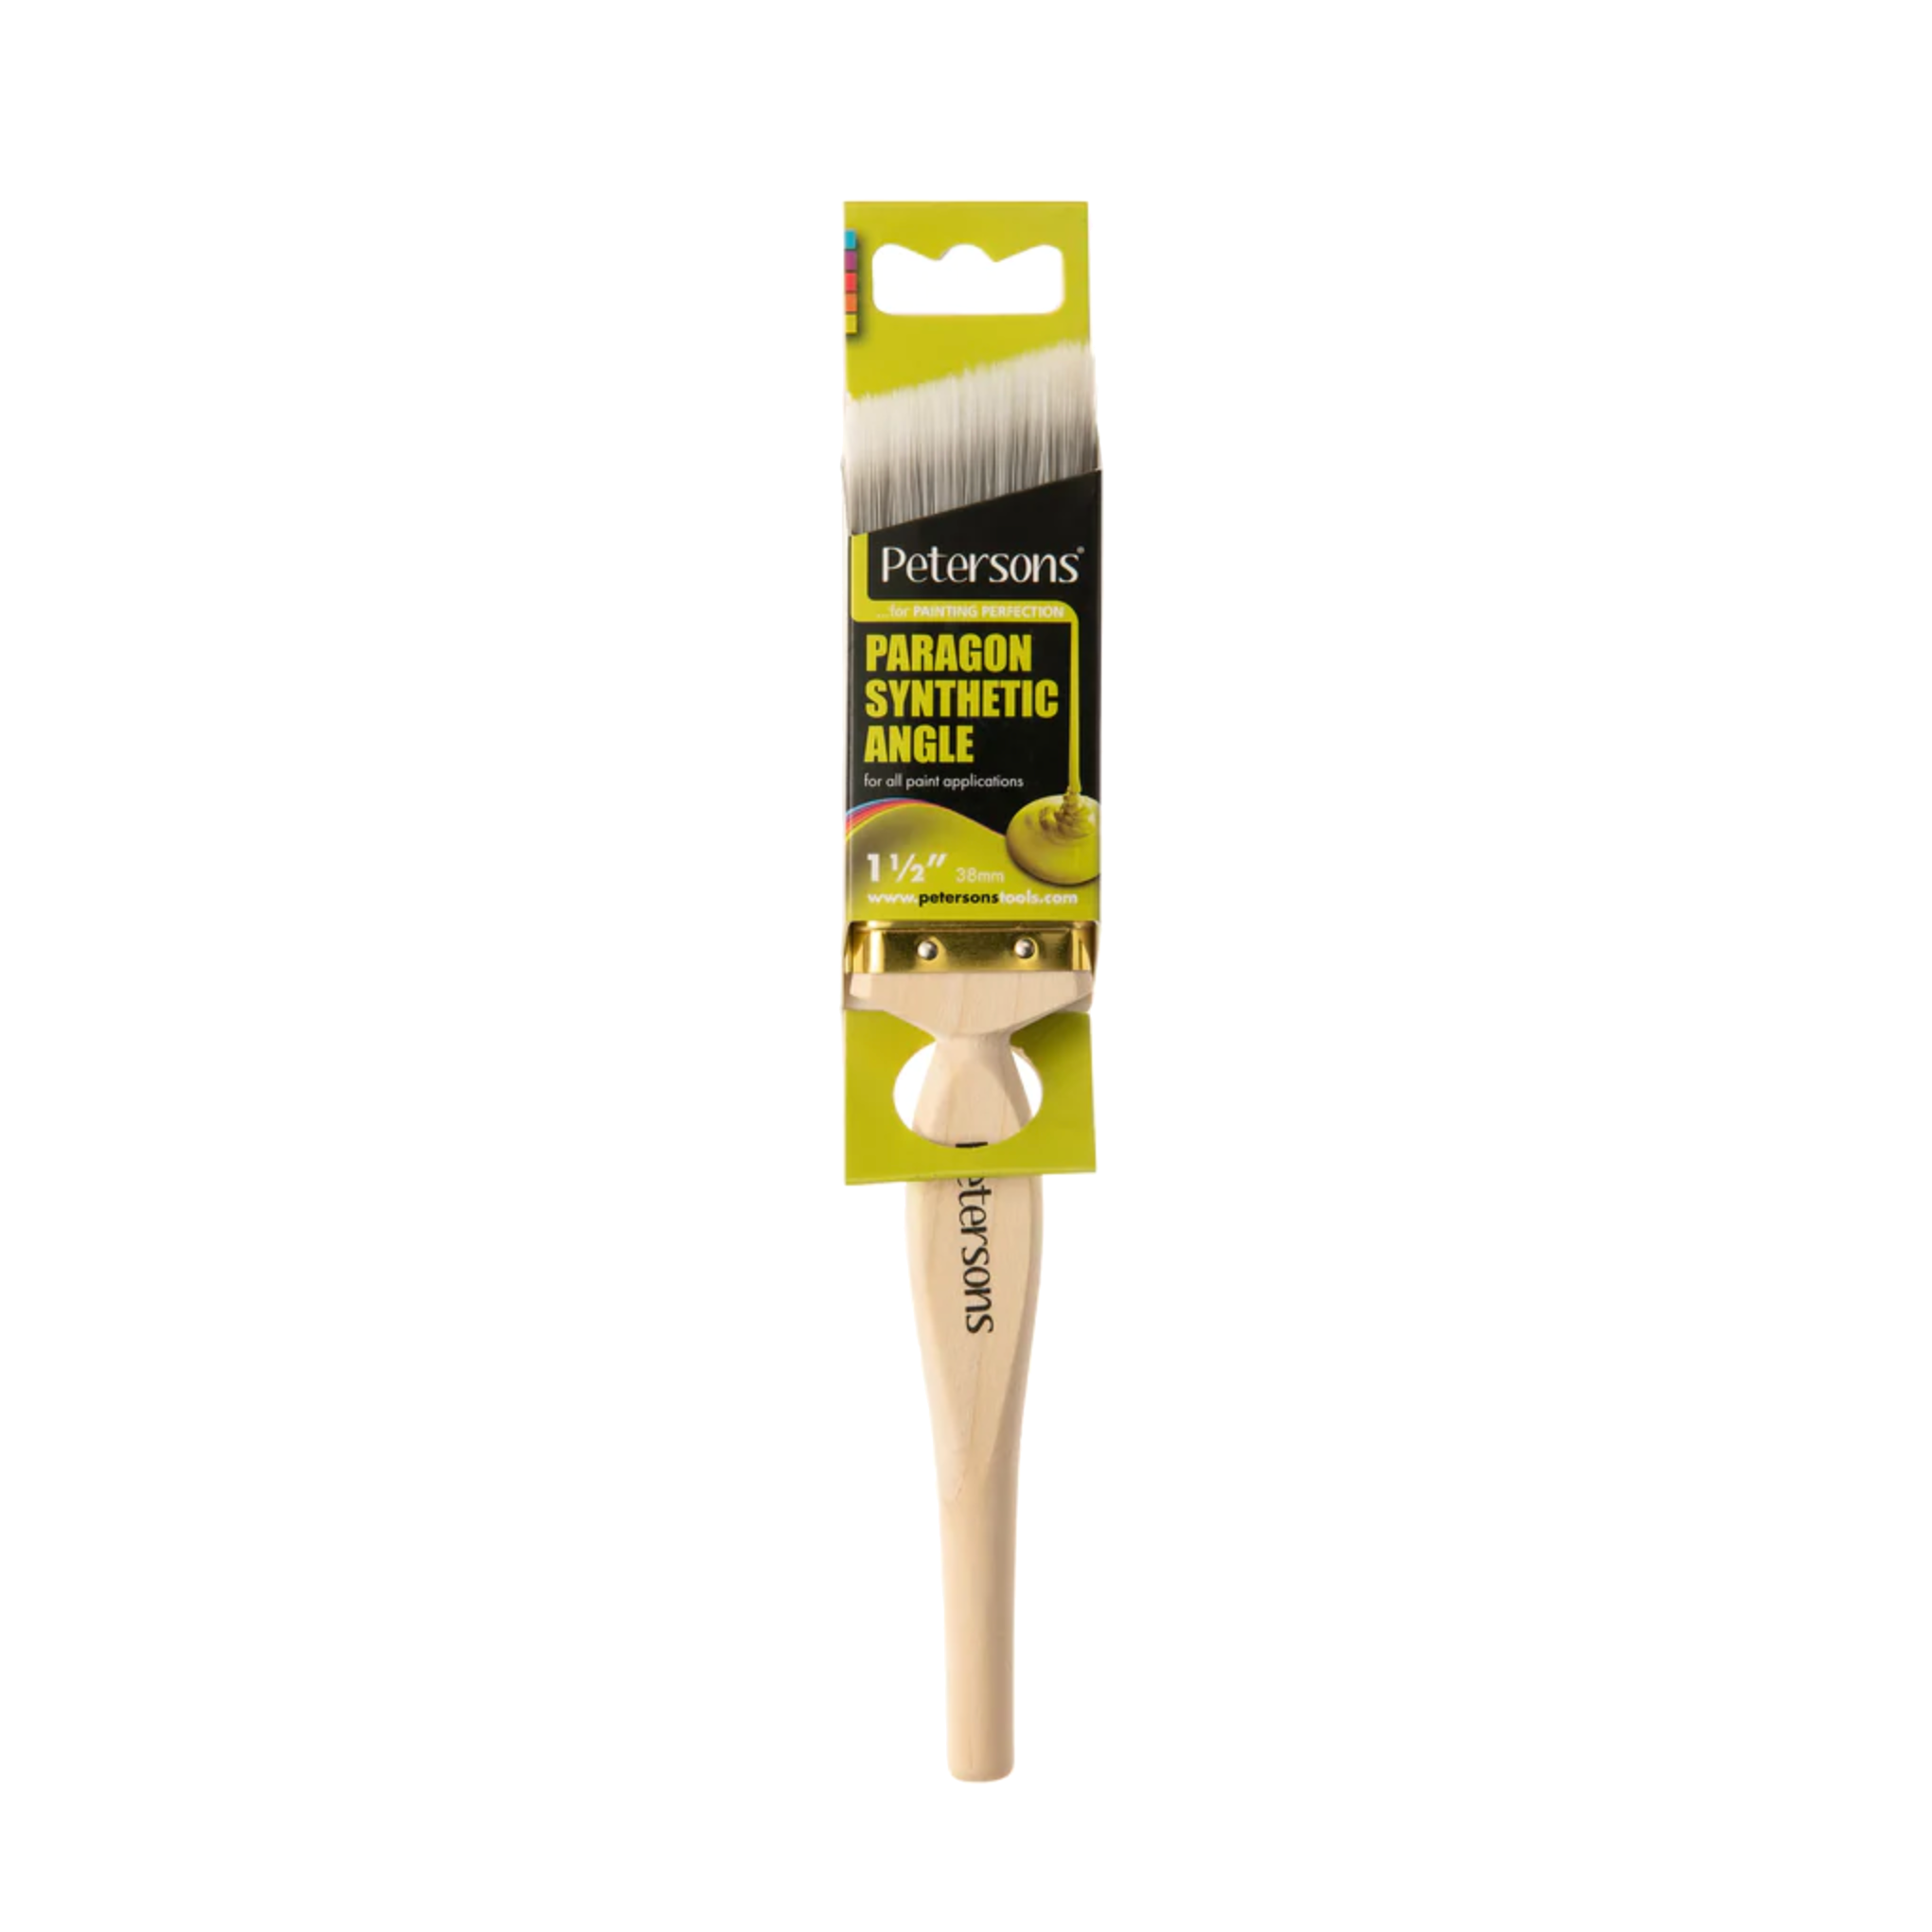 Paragon Synthetic Angle Paint Brush